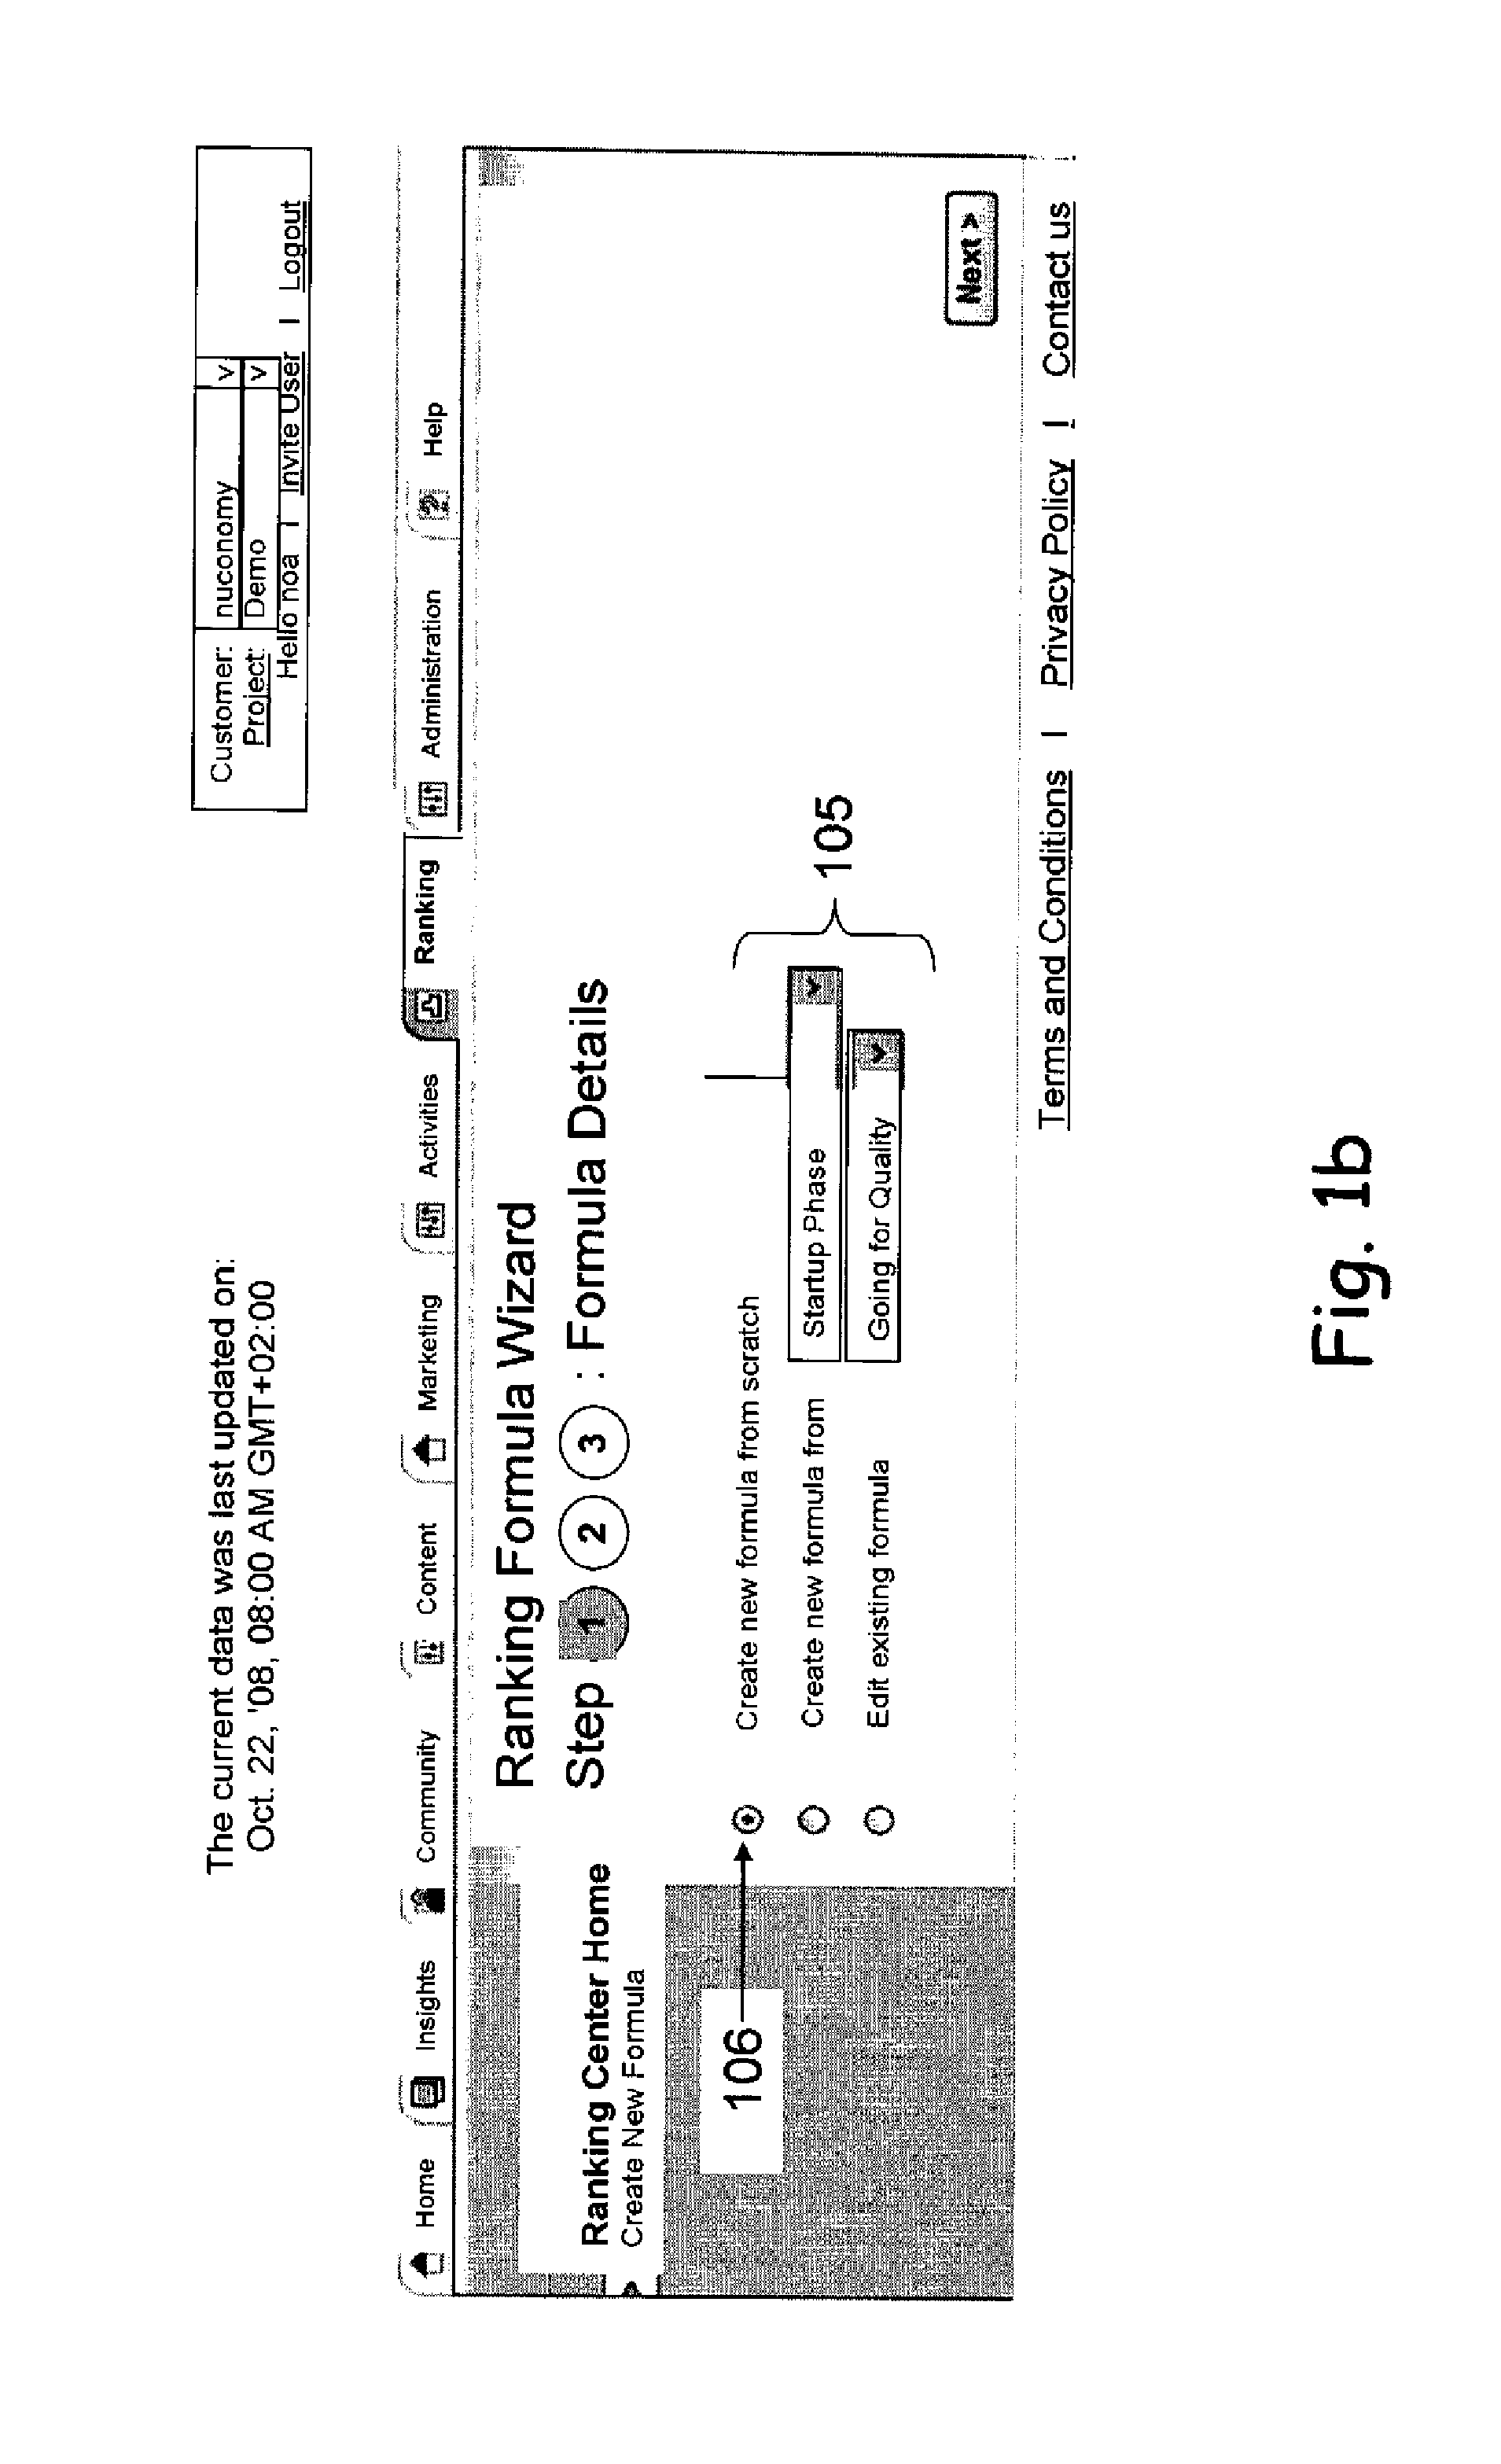 System and method for applying in-depth data mining tools for participating websites